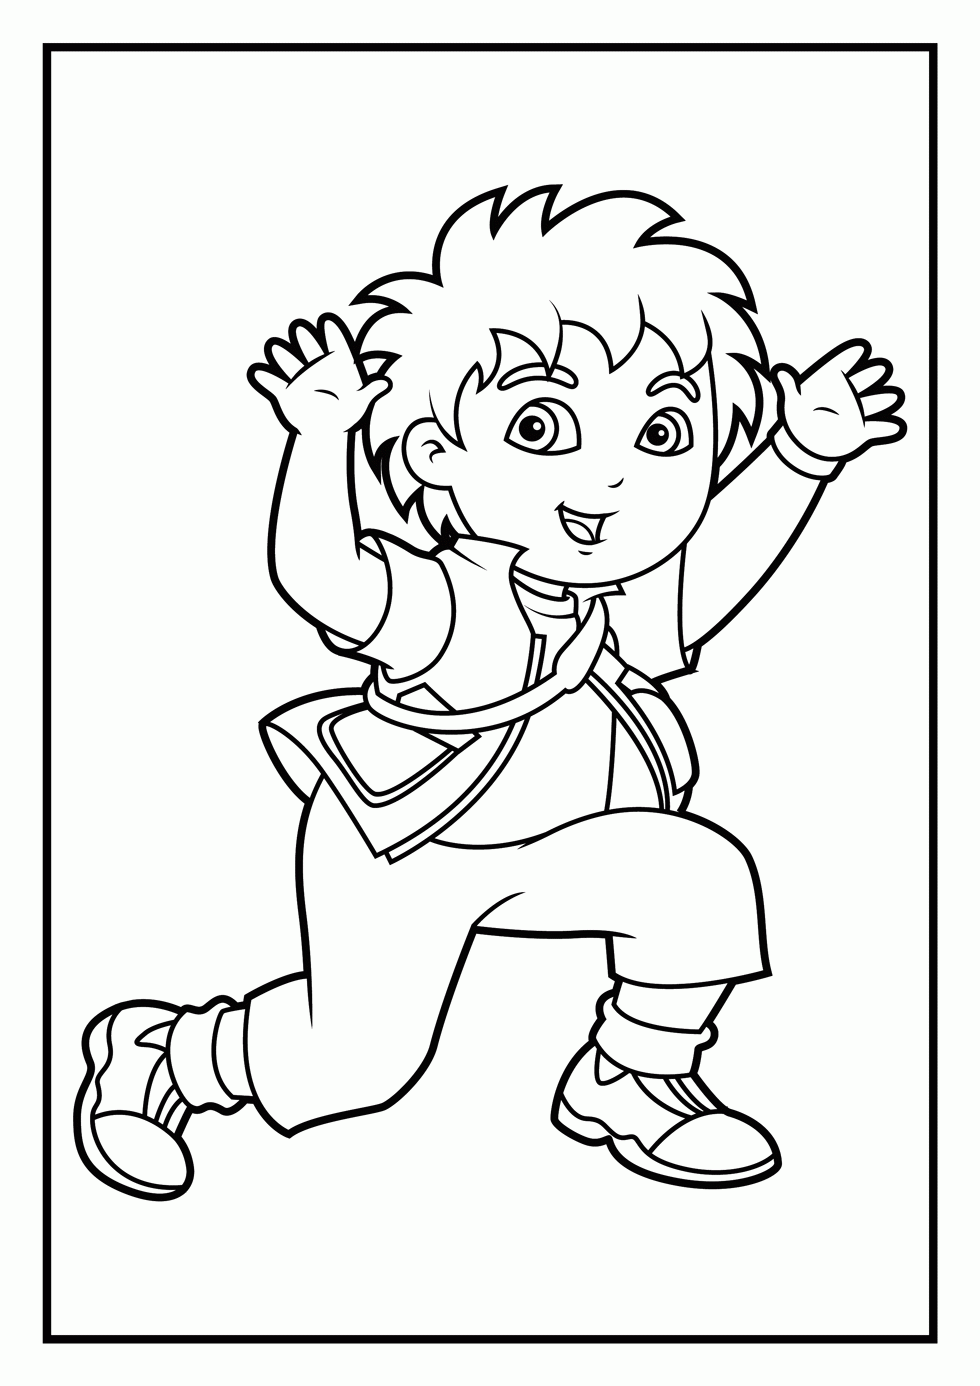 Diego coloring page